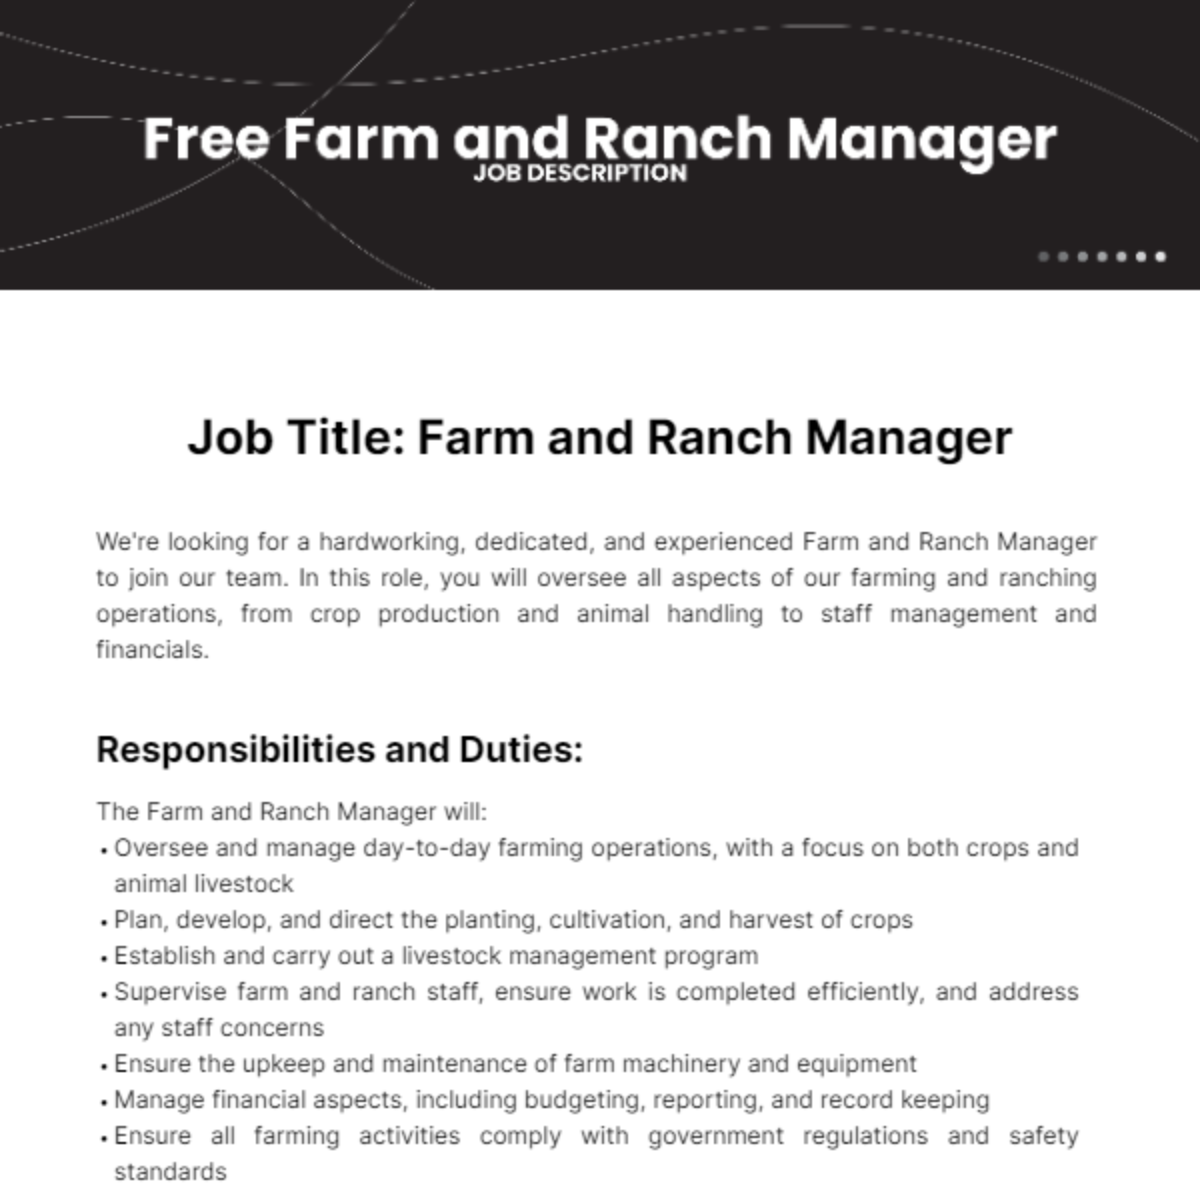 Free Farm and Ranch Manager Job Description Template